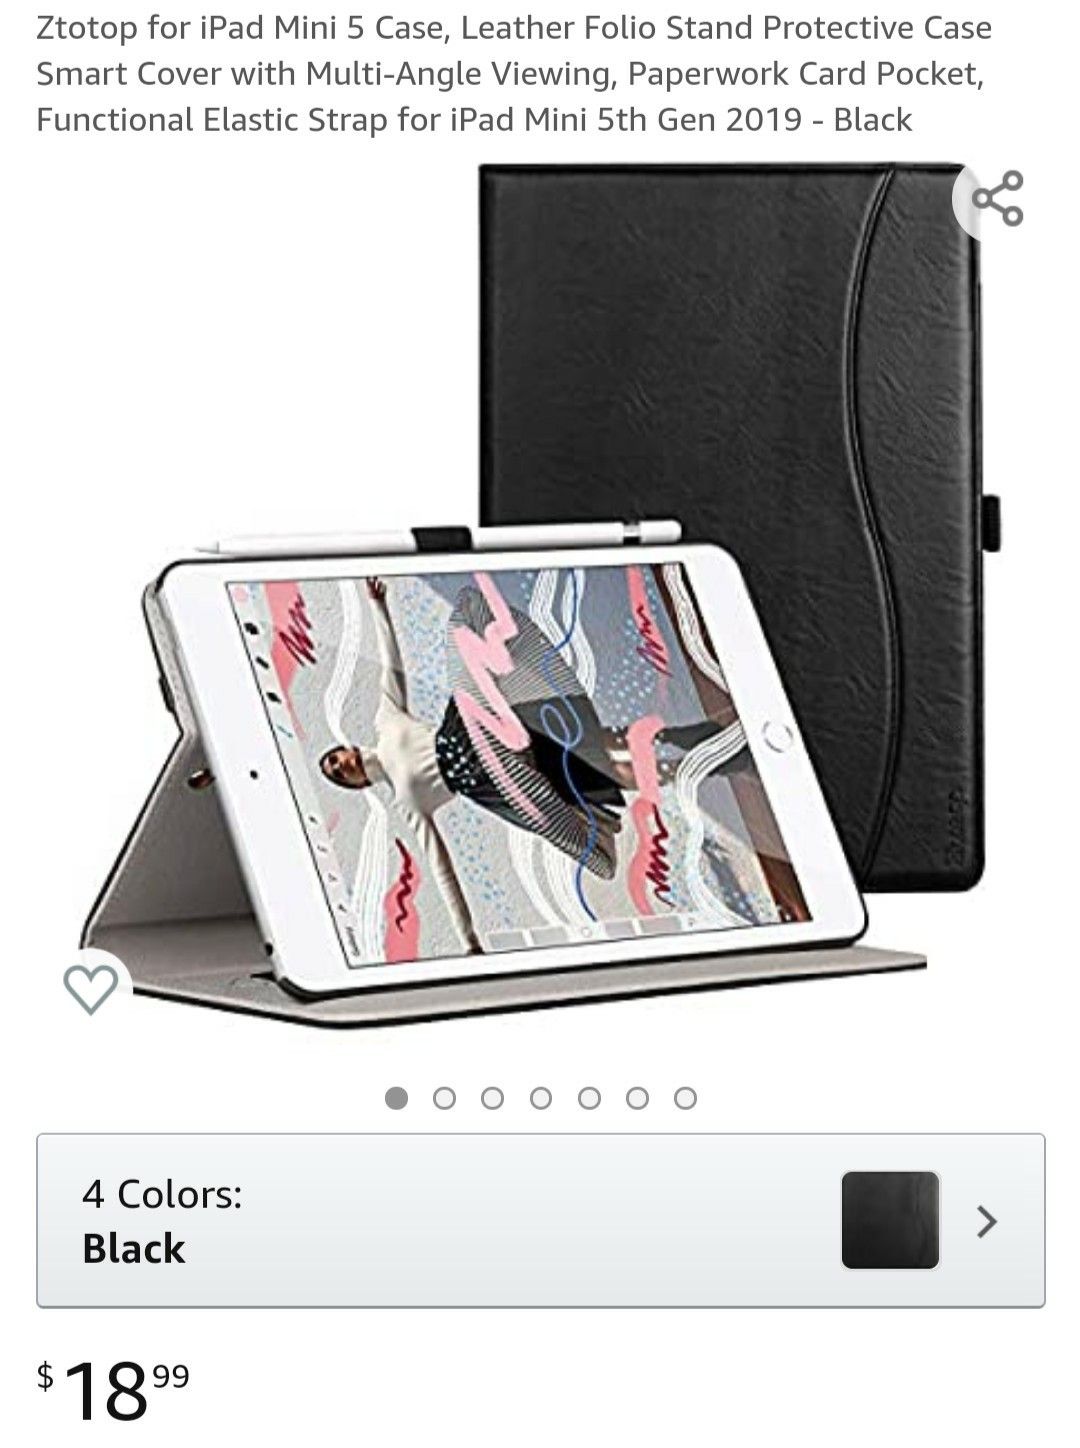 iPad Mini 5 Case, Leather Folio Stand Protective Case Smart Cover with Multi-Angle Viewing, Card Pocket, for iPad Mini 5th Gen 2019 - Black